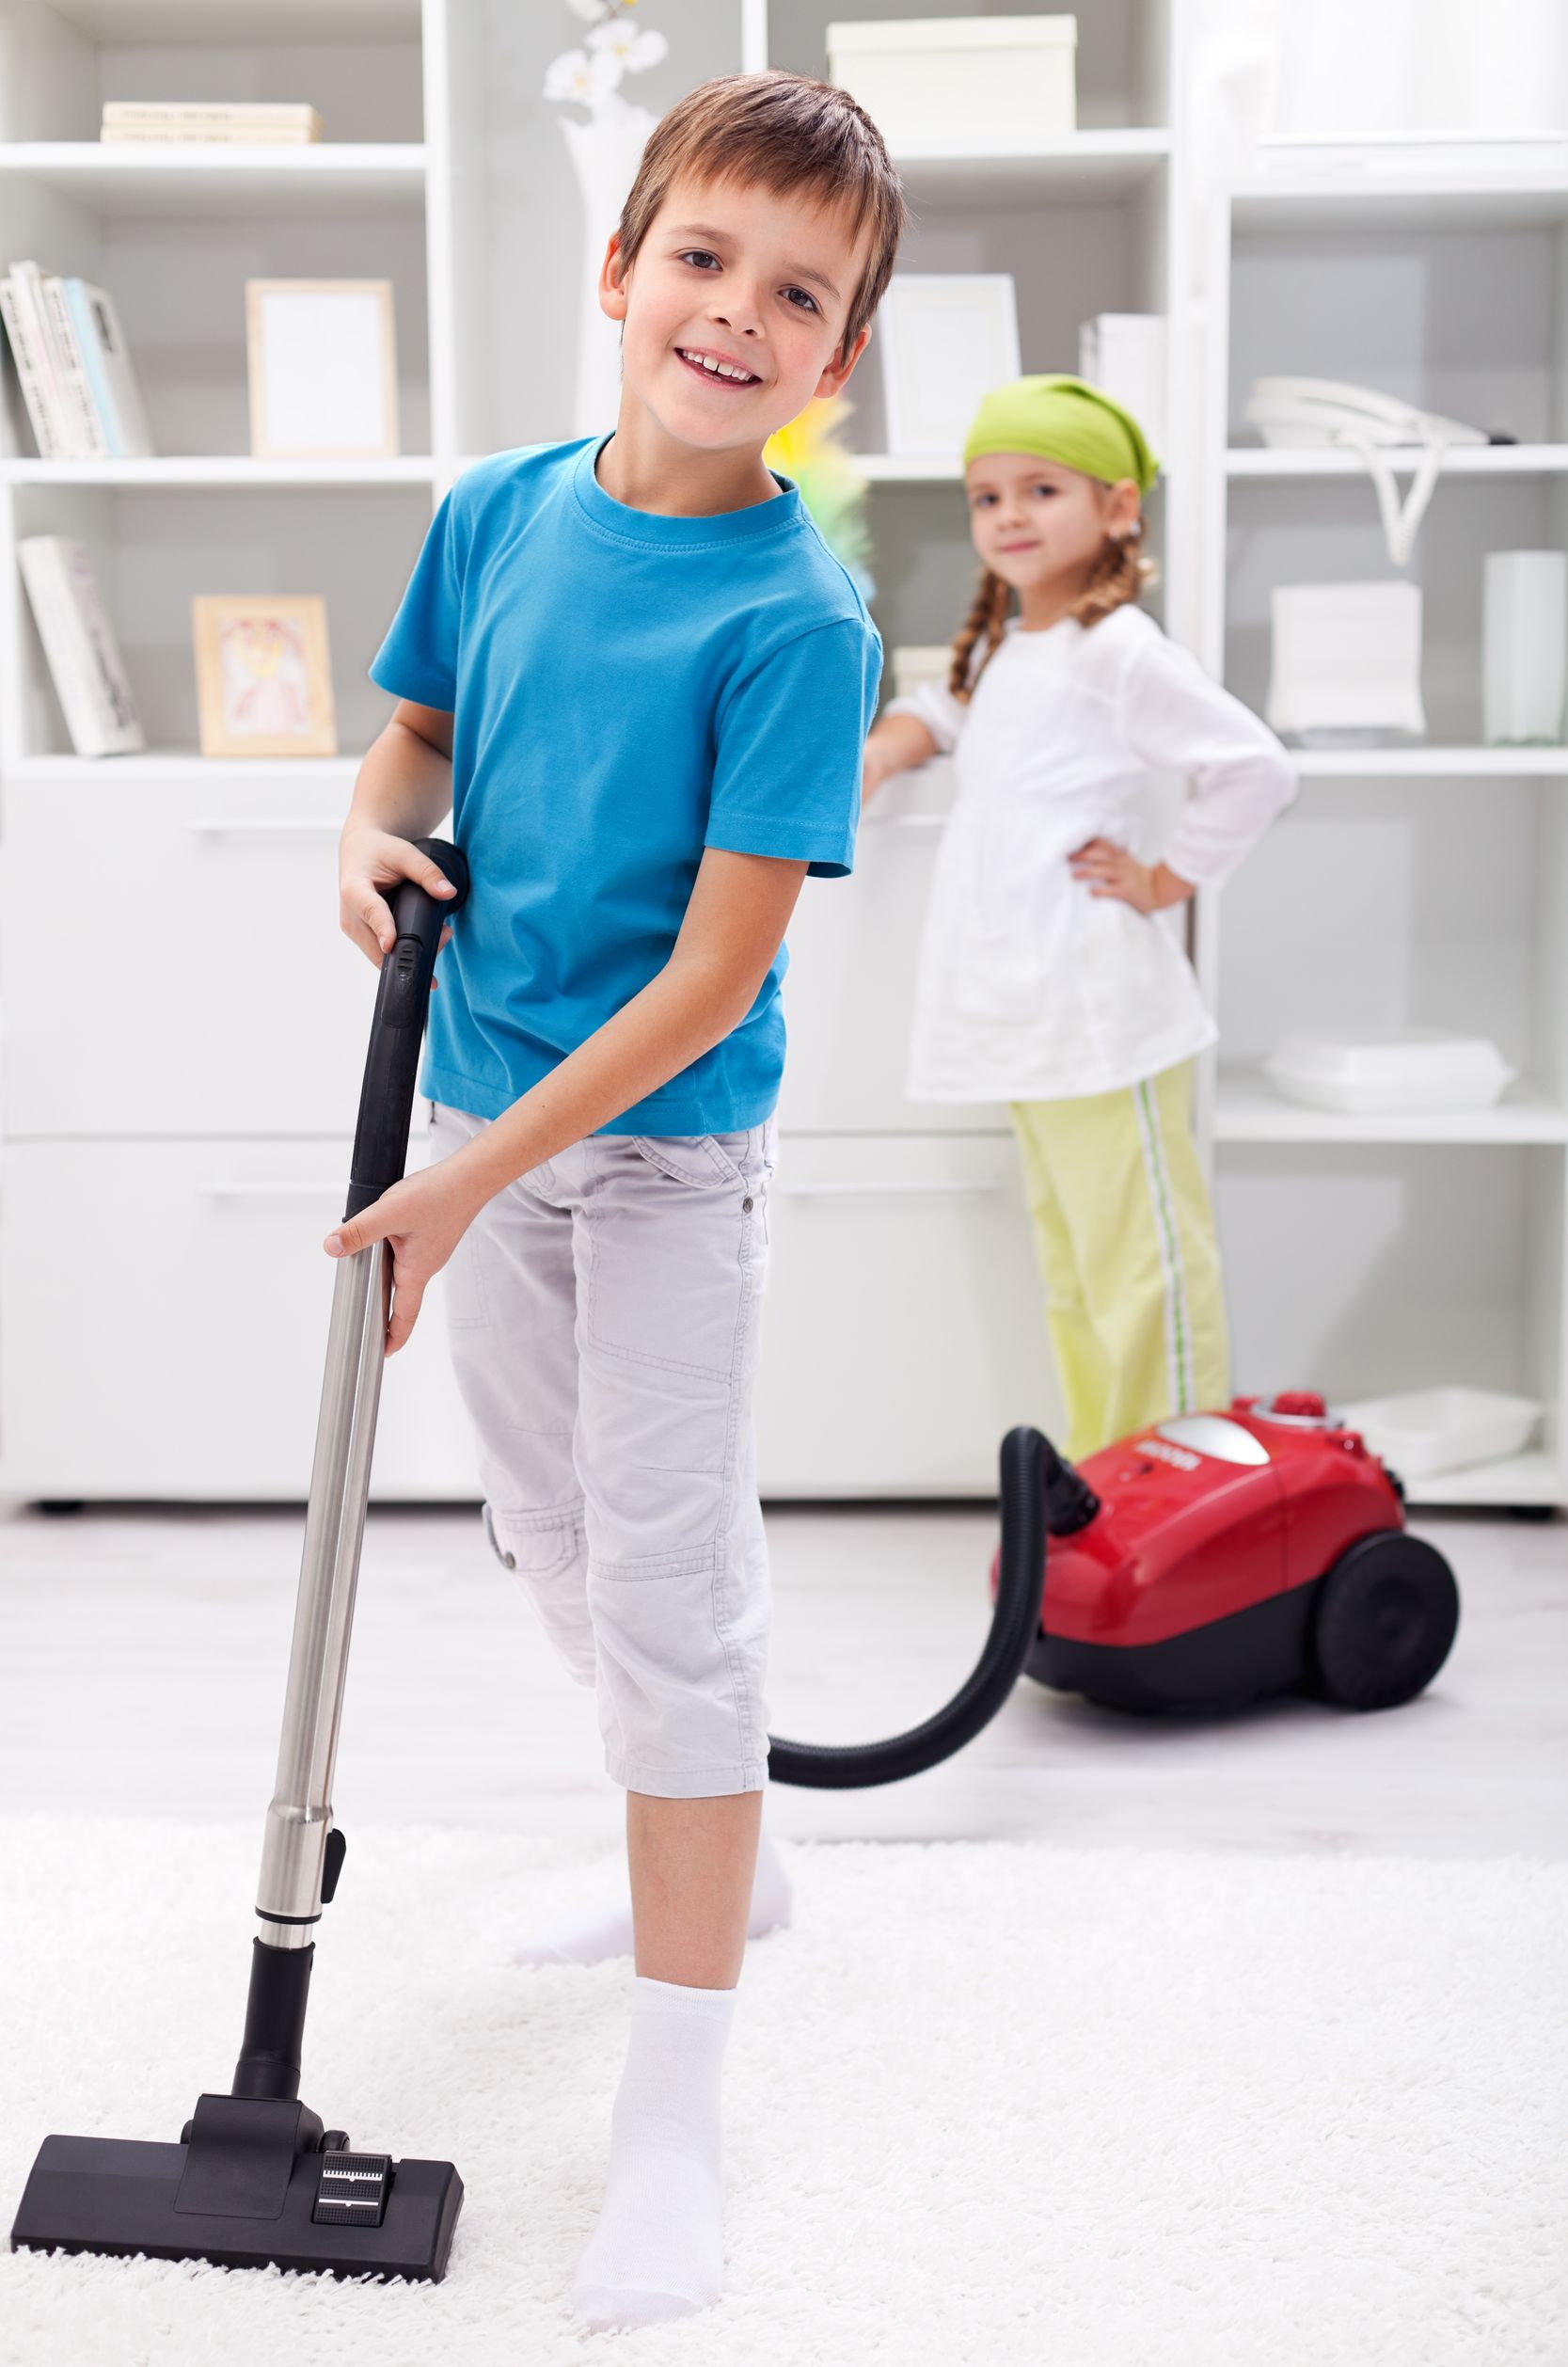 Teach your kids financial responsibility by letting them help around the house.